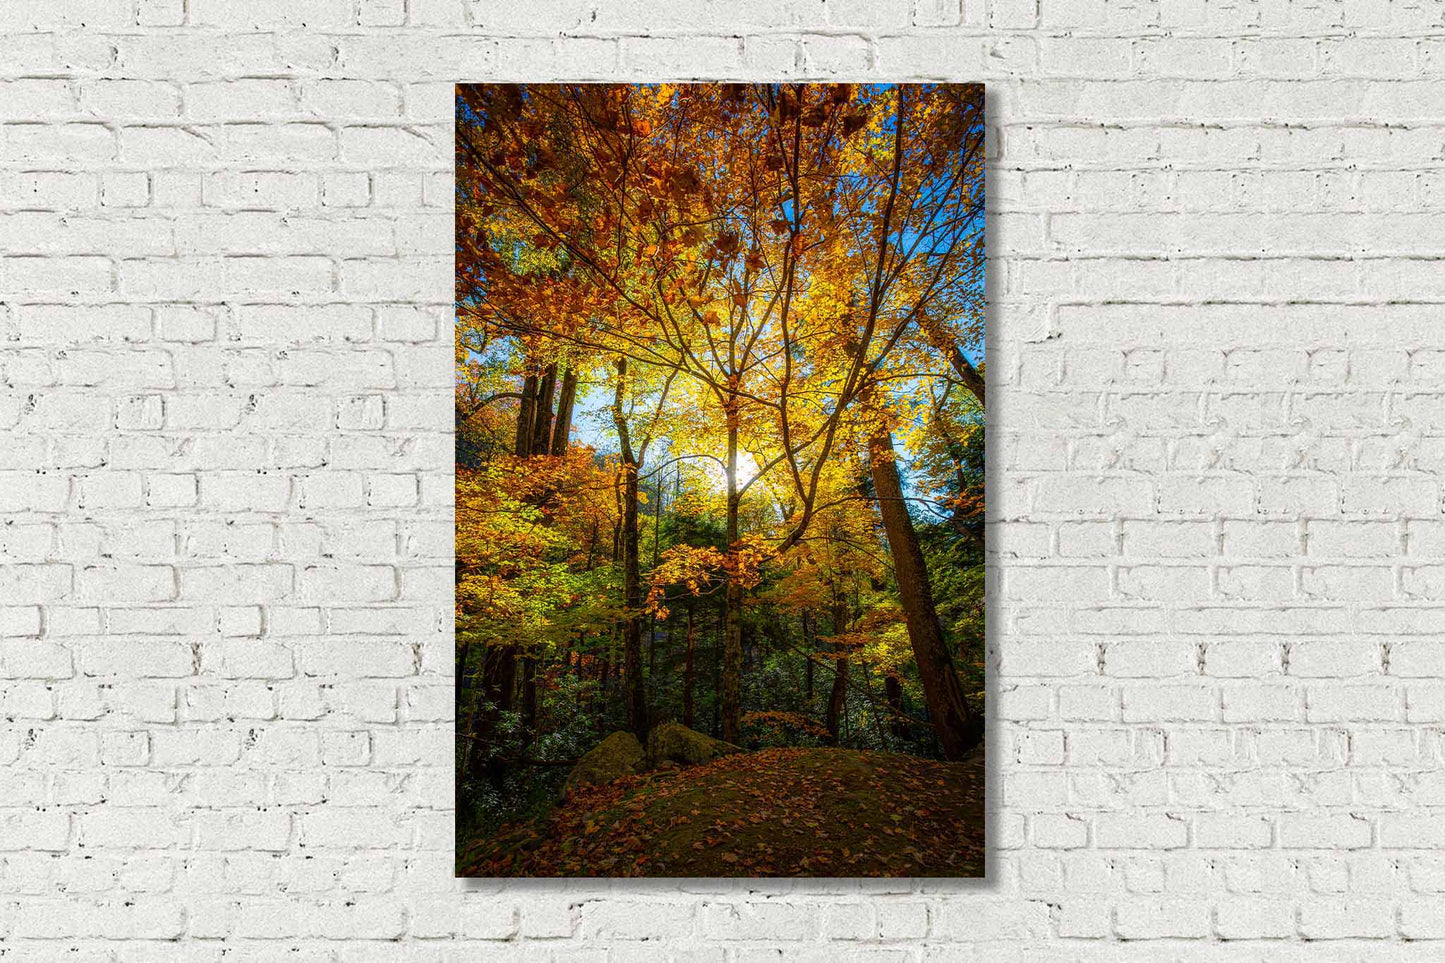 Vertical metal print of sunlight illuminating fall foliage in a forest on an autumn day in the Great Smoky Mountains of Tennessee by Sean Ramsey of Southern Plains Photography.